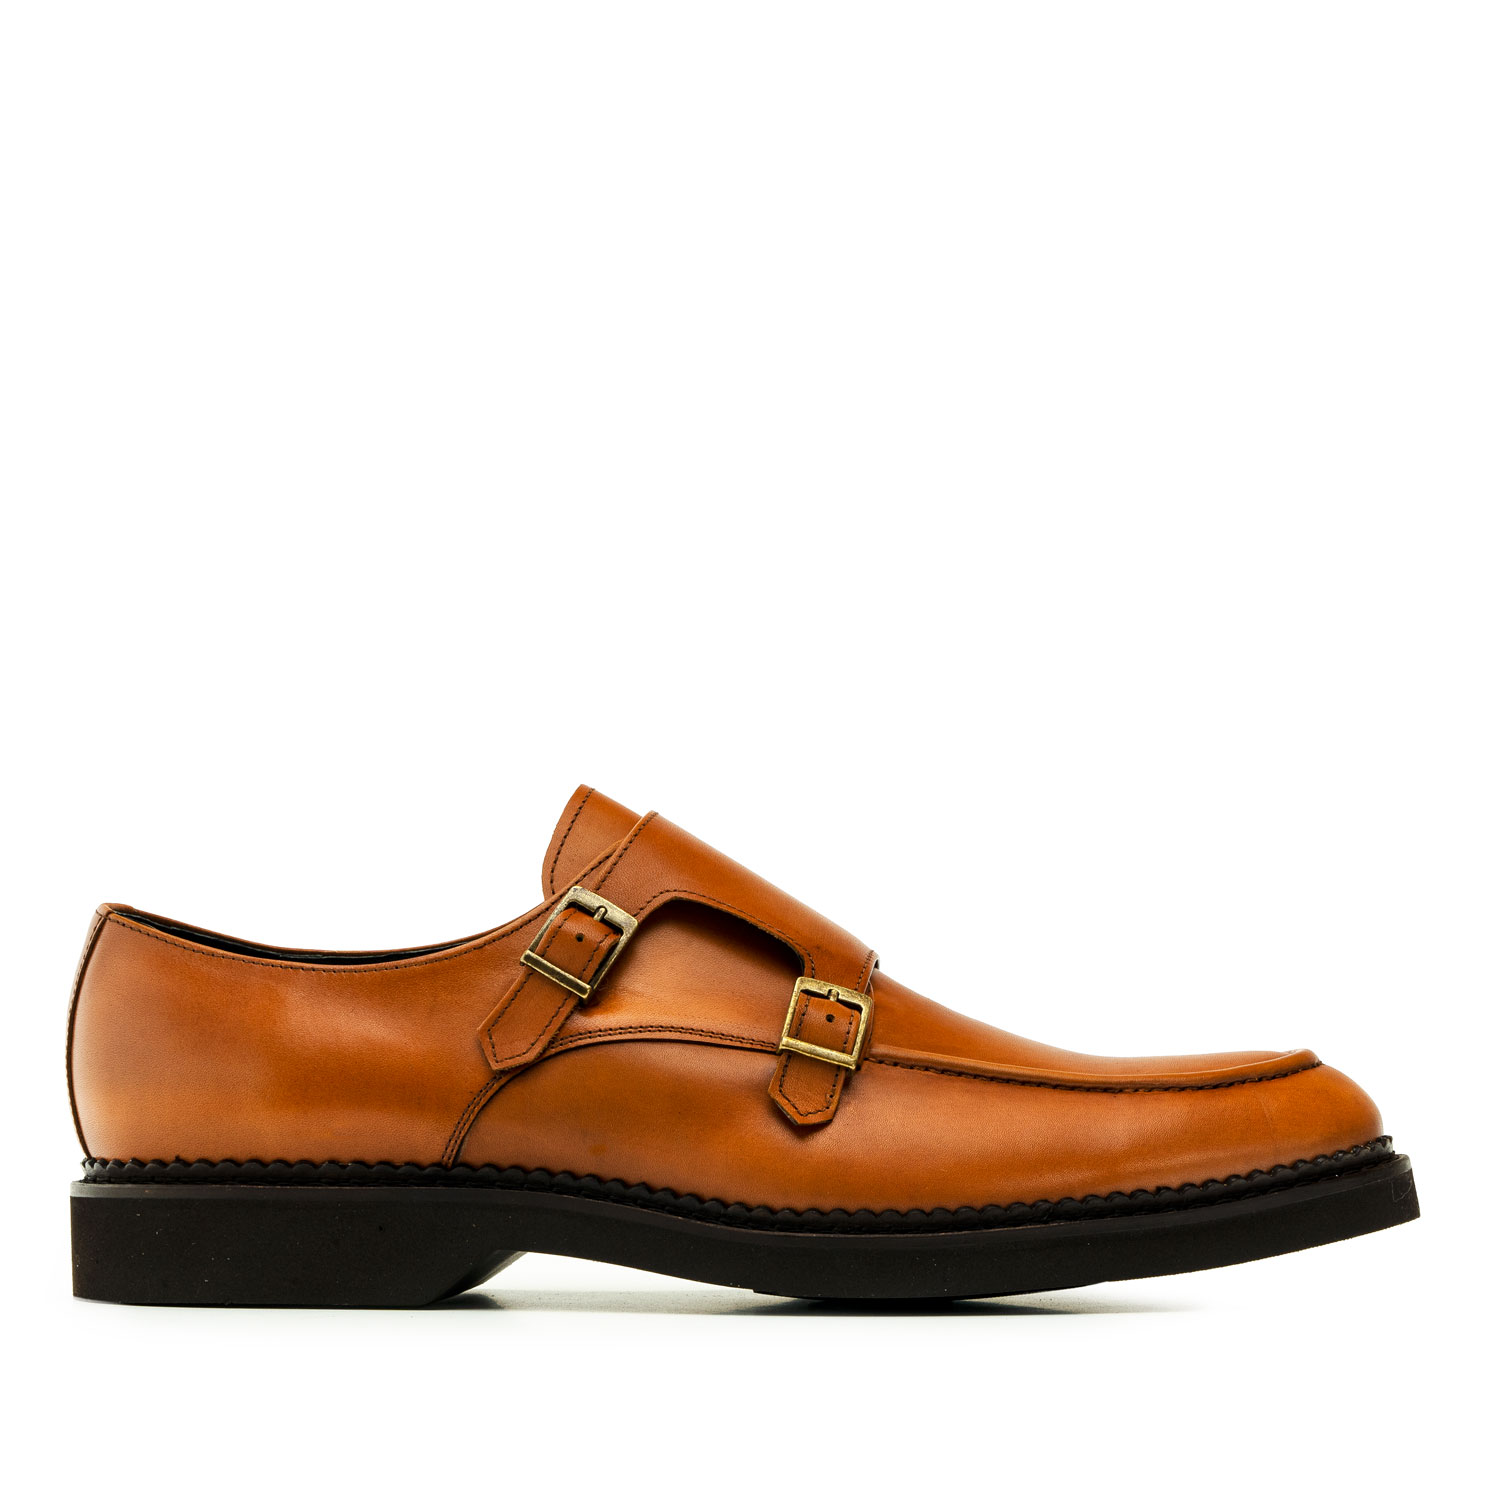 Monkstrap Shoes in Brown Leather 